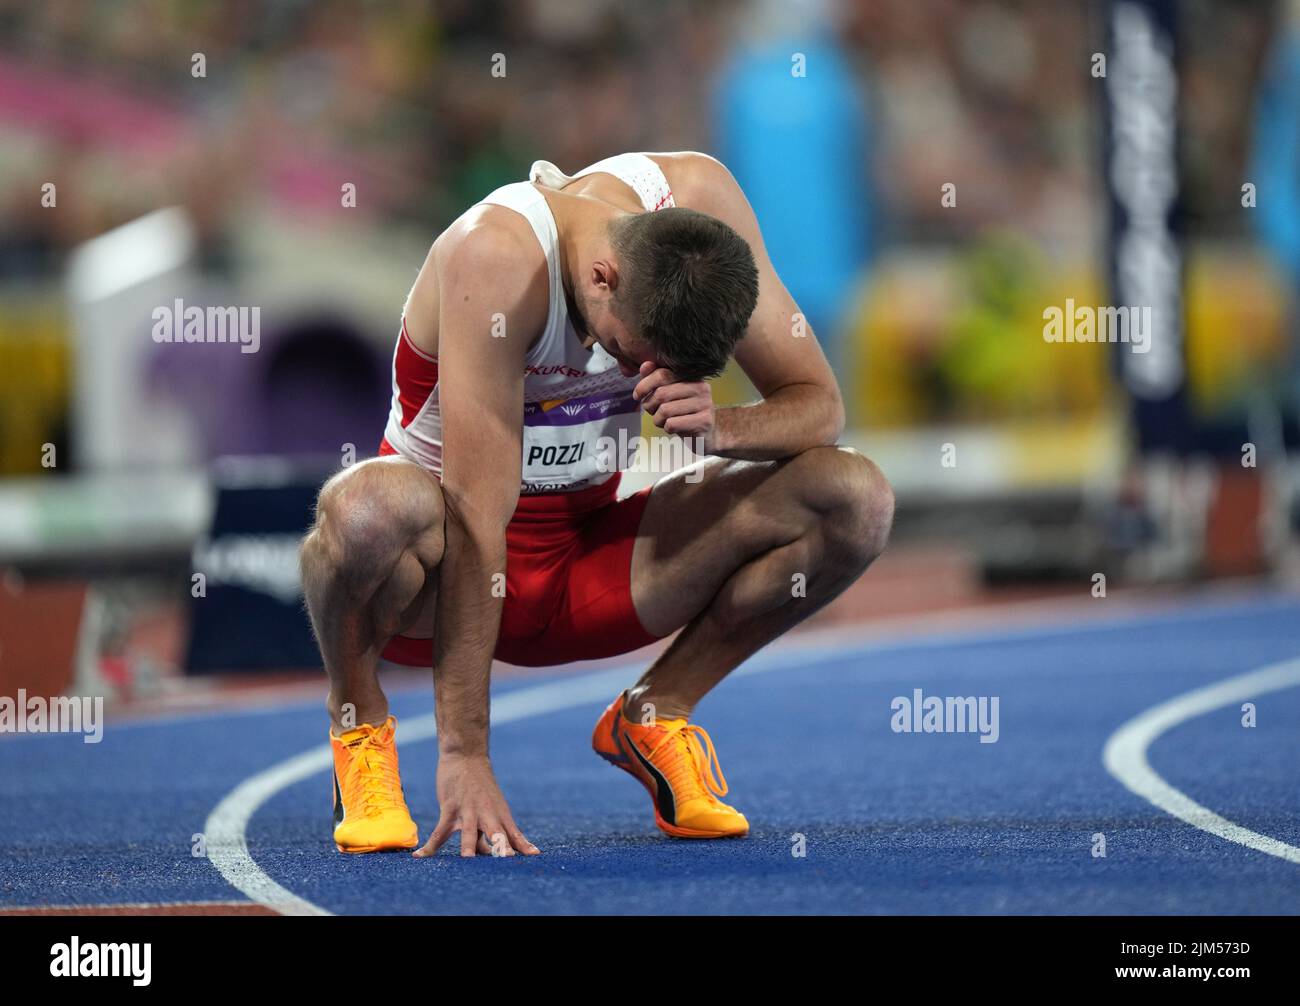 England's Andrew Pozzi waits before being awarded bronze in the Men's 110m Hurdles Final at Alexander Stadium on day seven of the 2022 Commonwealth Games in Birmingham. Picture date: Thursday August 4, 2022. Stock Photo